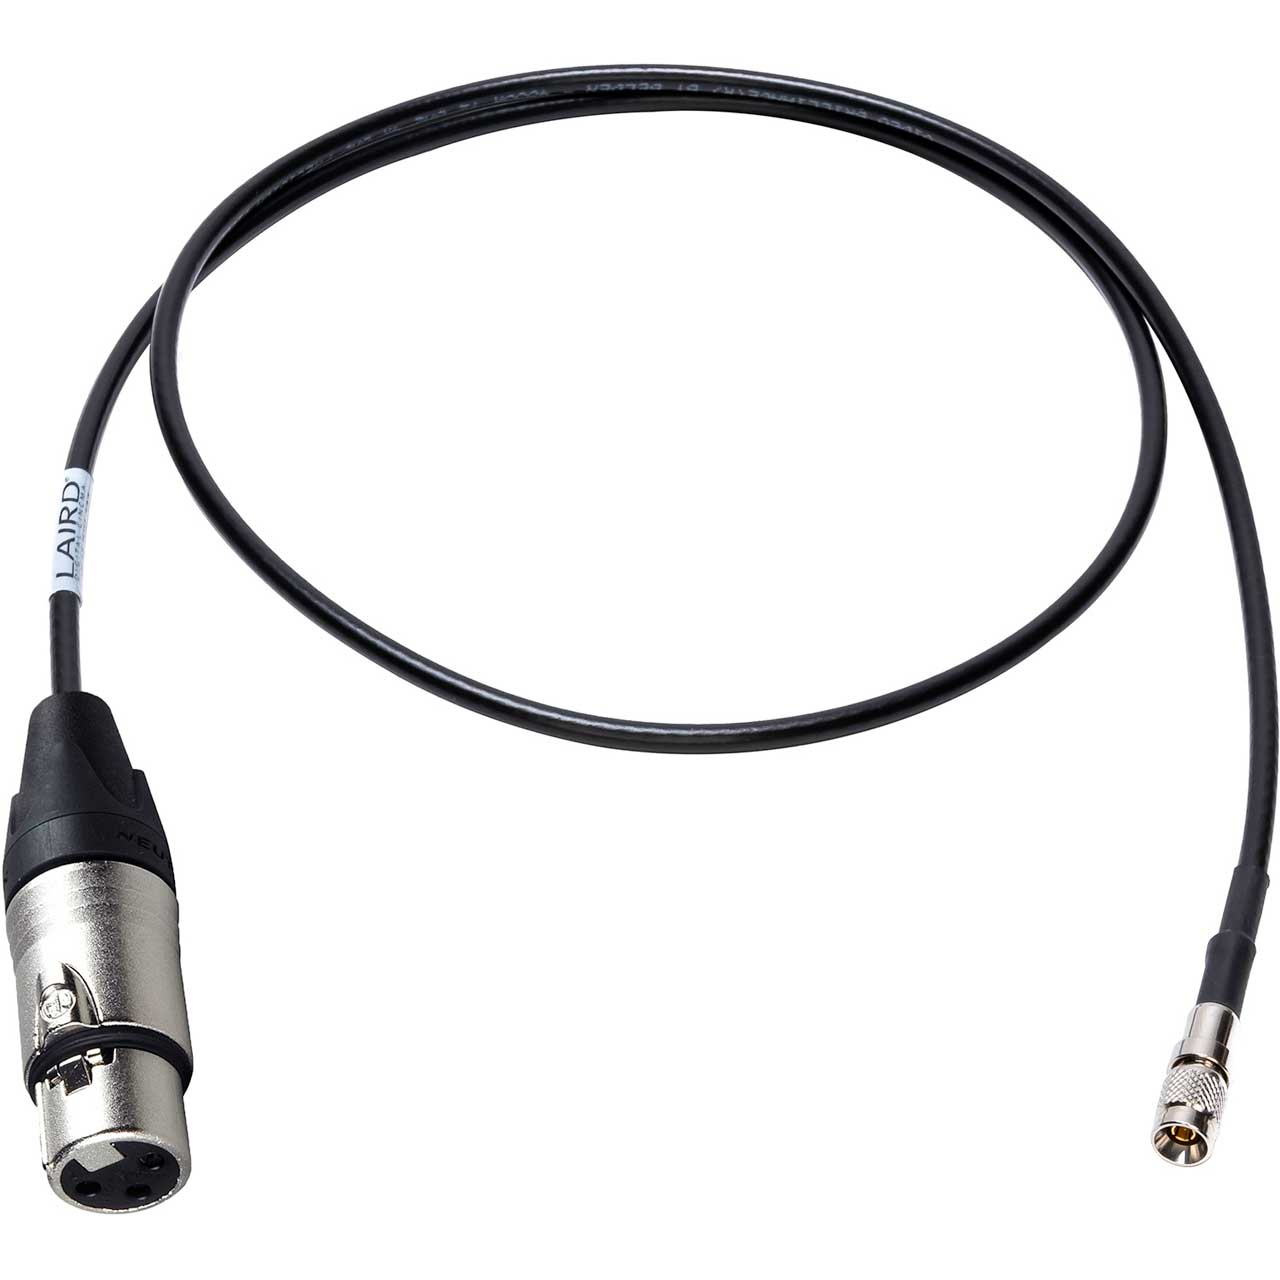 Laird XLF-DIN-025 DIN 1.0/2.3 to XLR-M Time Code Cable - 25 Foot XLF-DIN-025